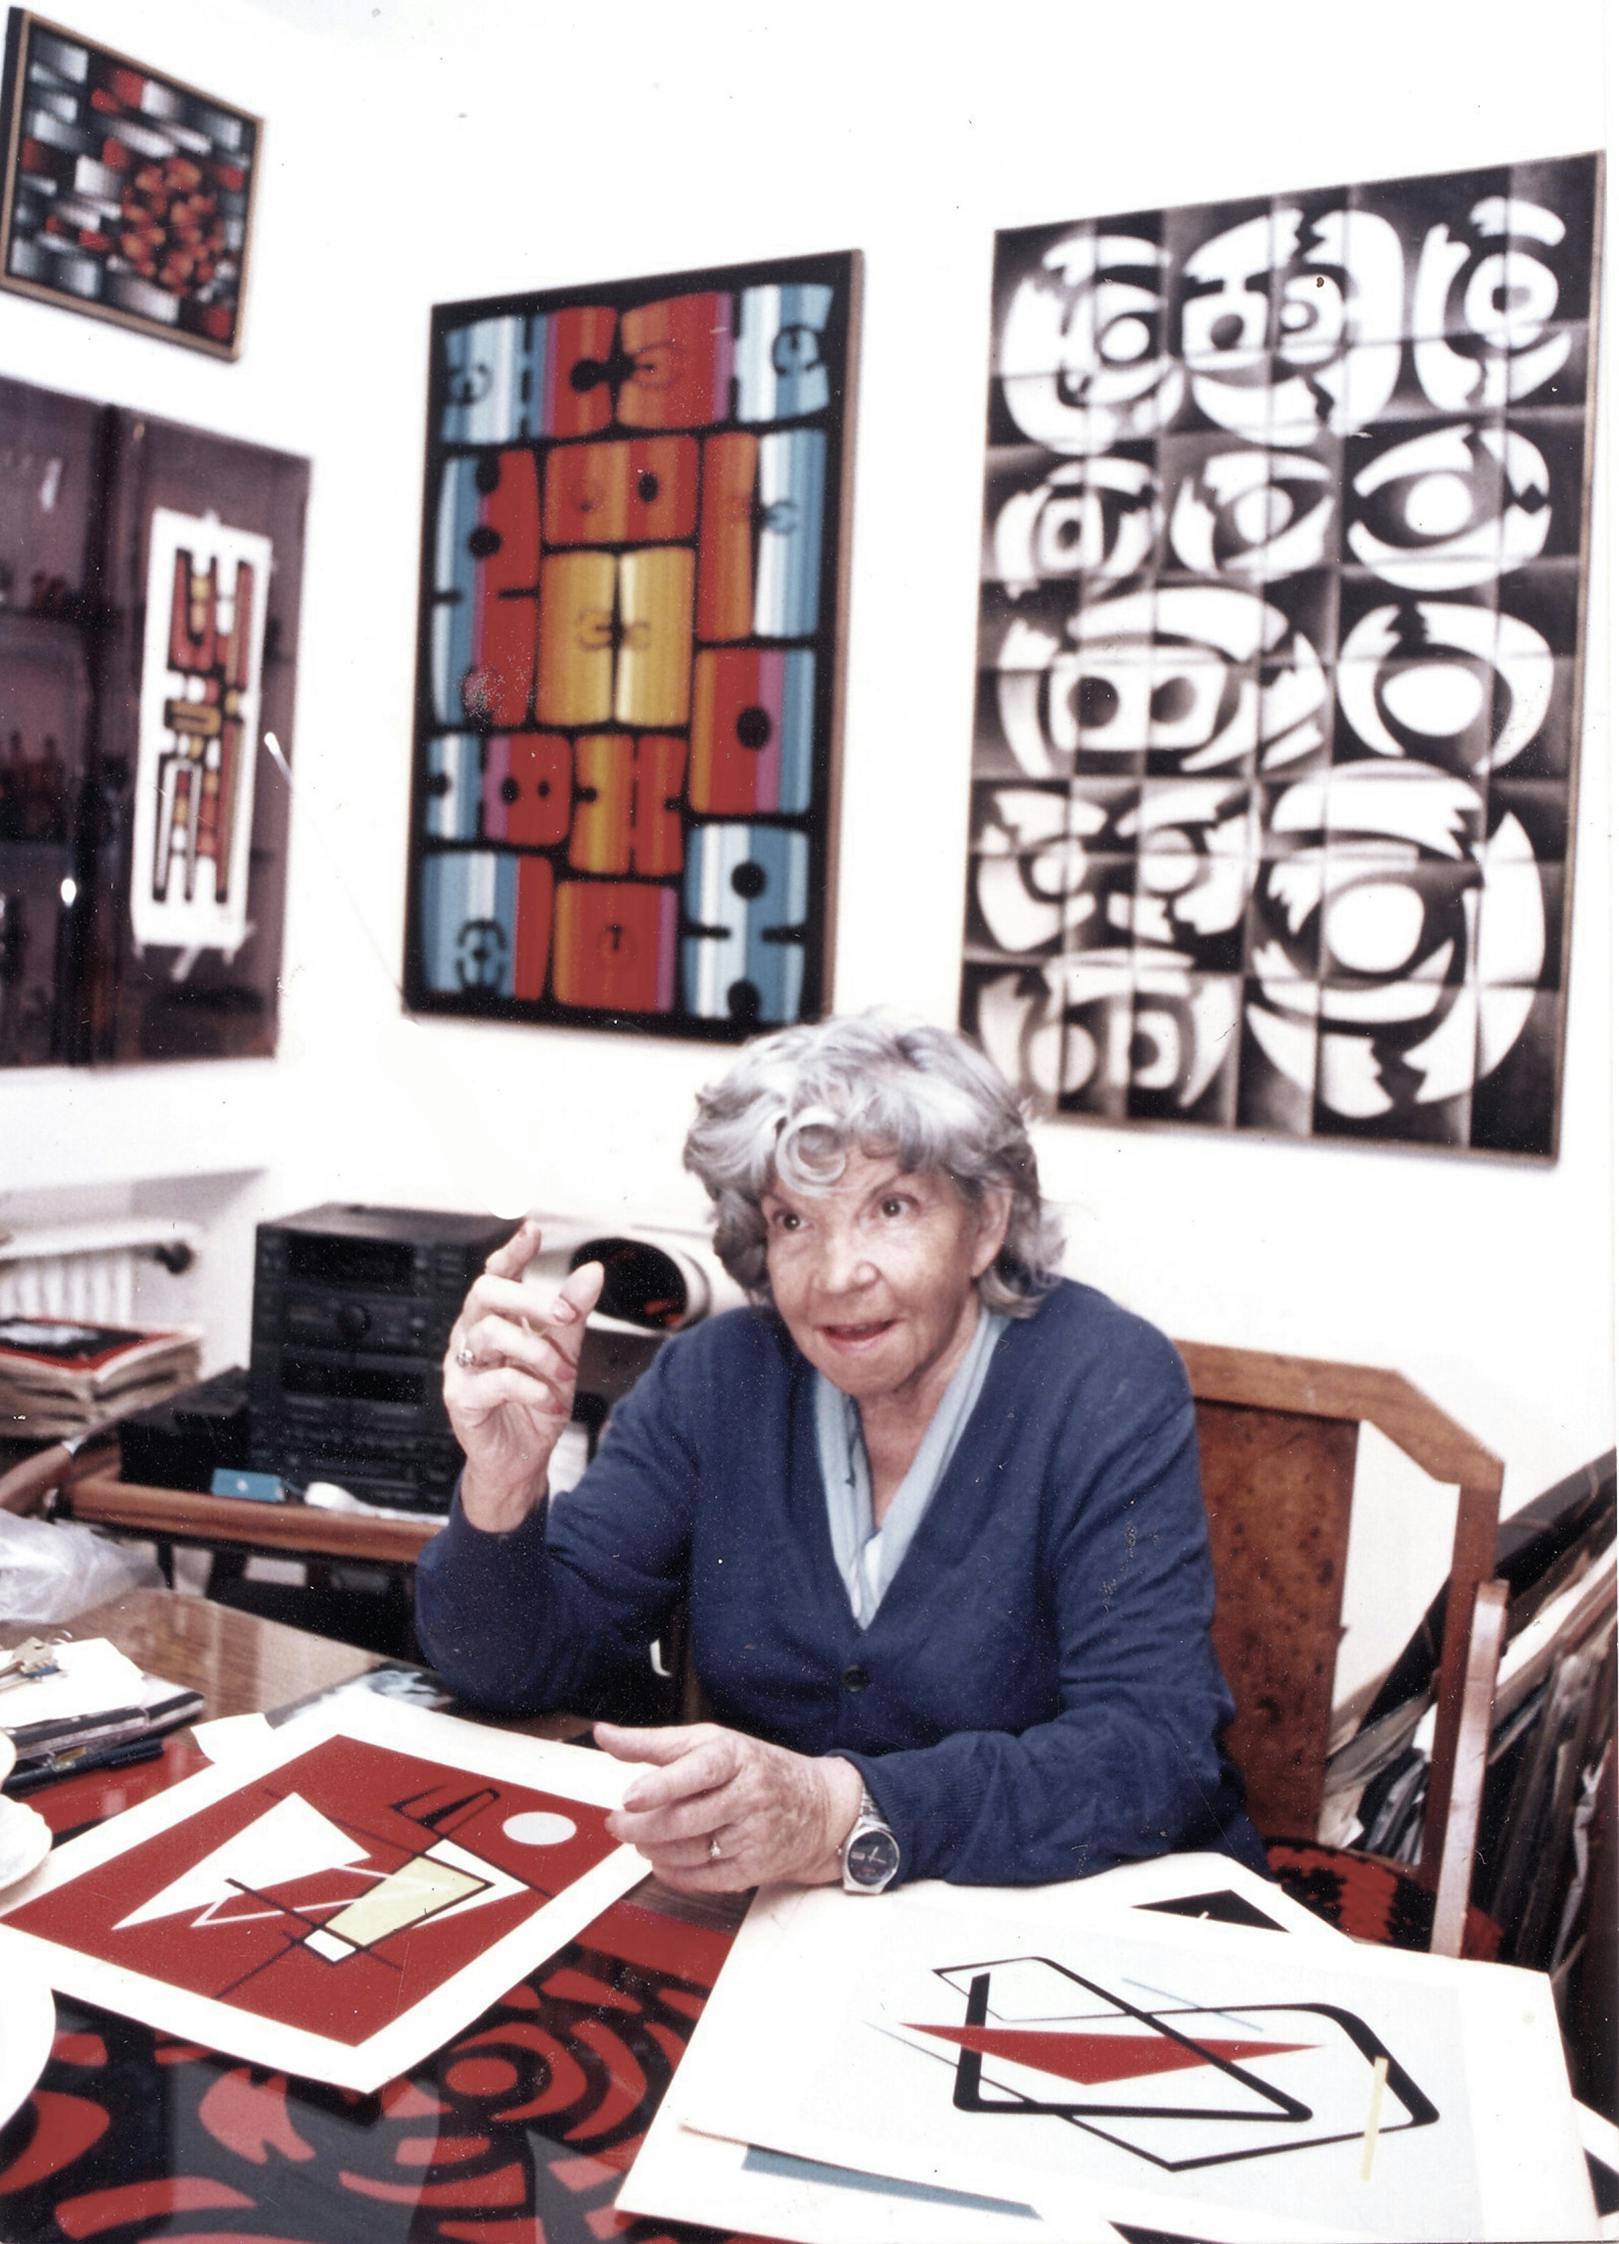 María Freire sitting at a desk surrounded by her paintings.